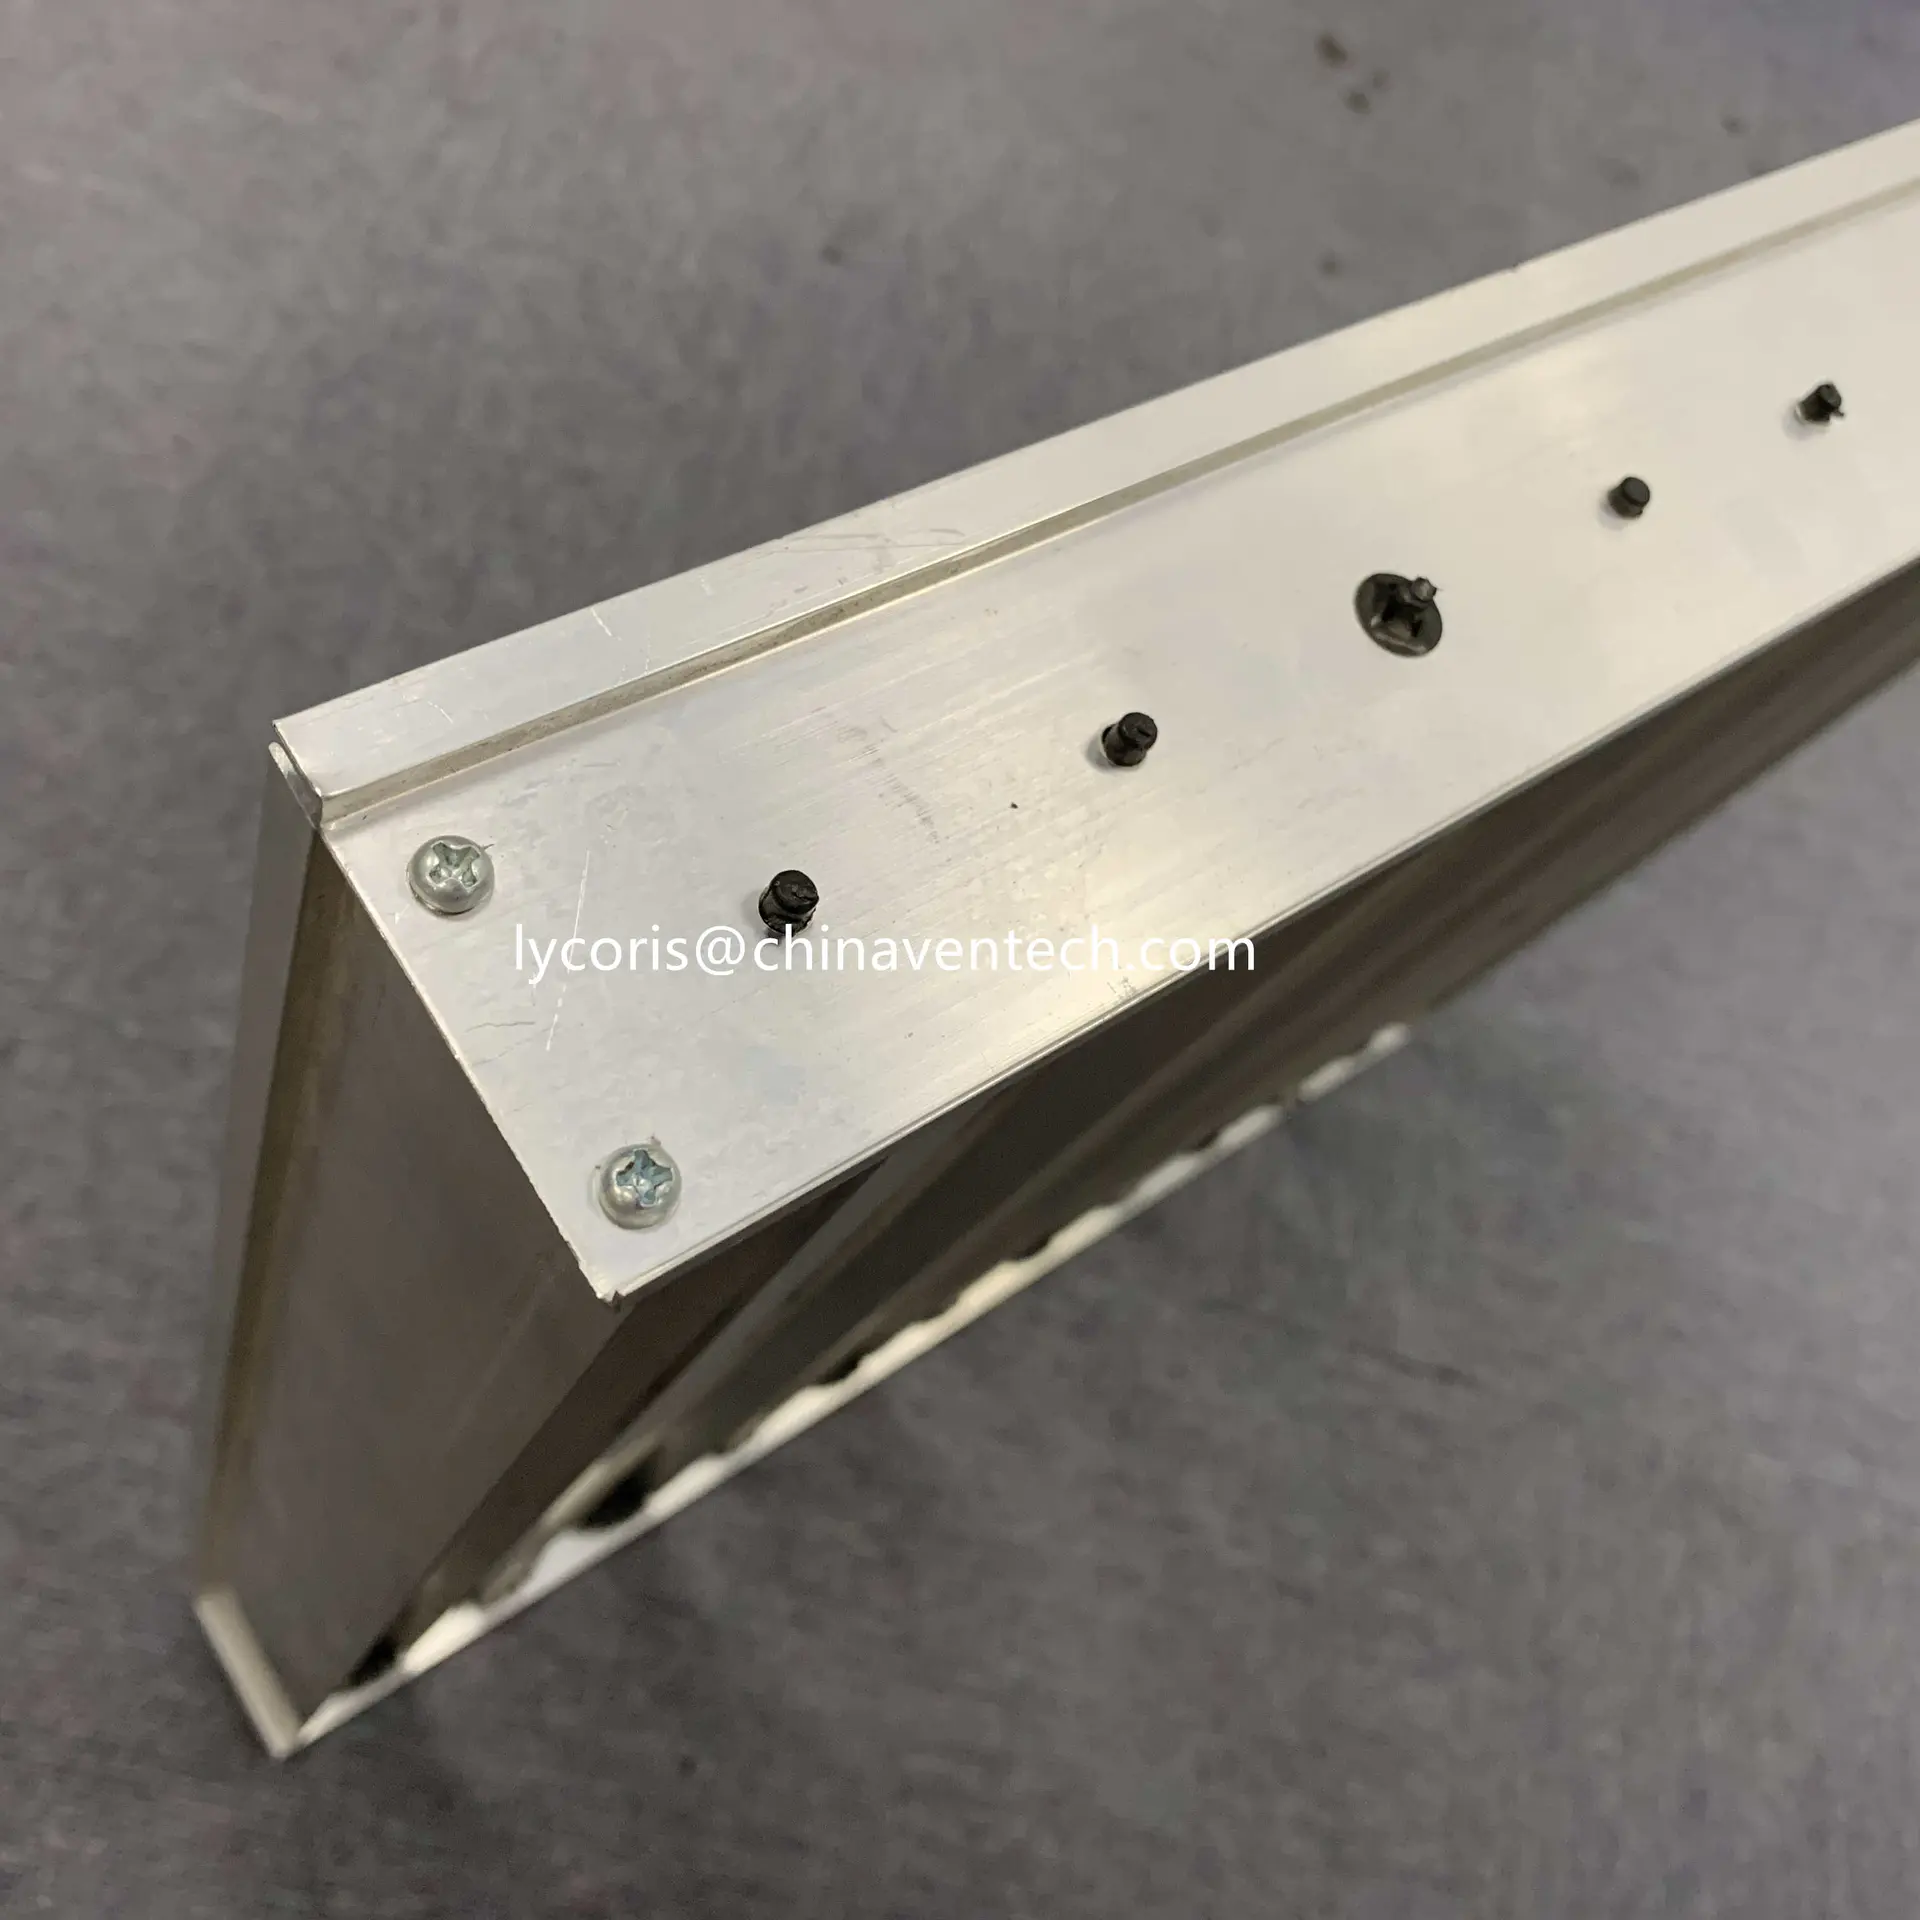 4 Way Ceiling Air Diffuser Gear Type Oppose Blade Damper Square Diffuser Air Damper Manual Duct Supply Grille Aluminum Damper